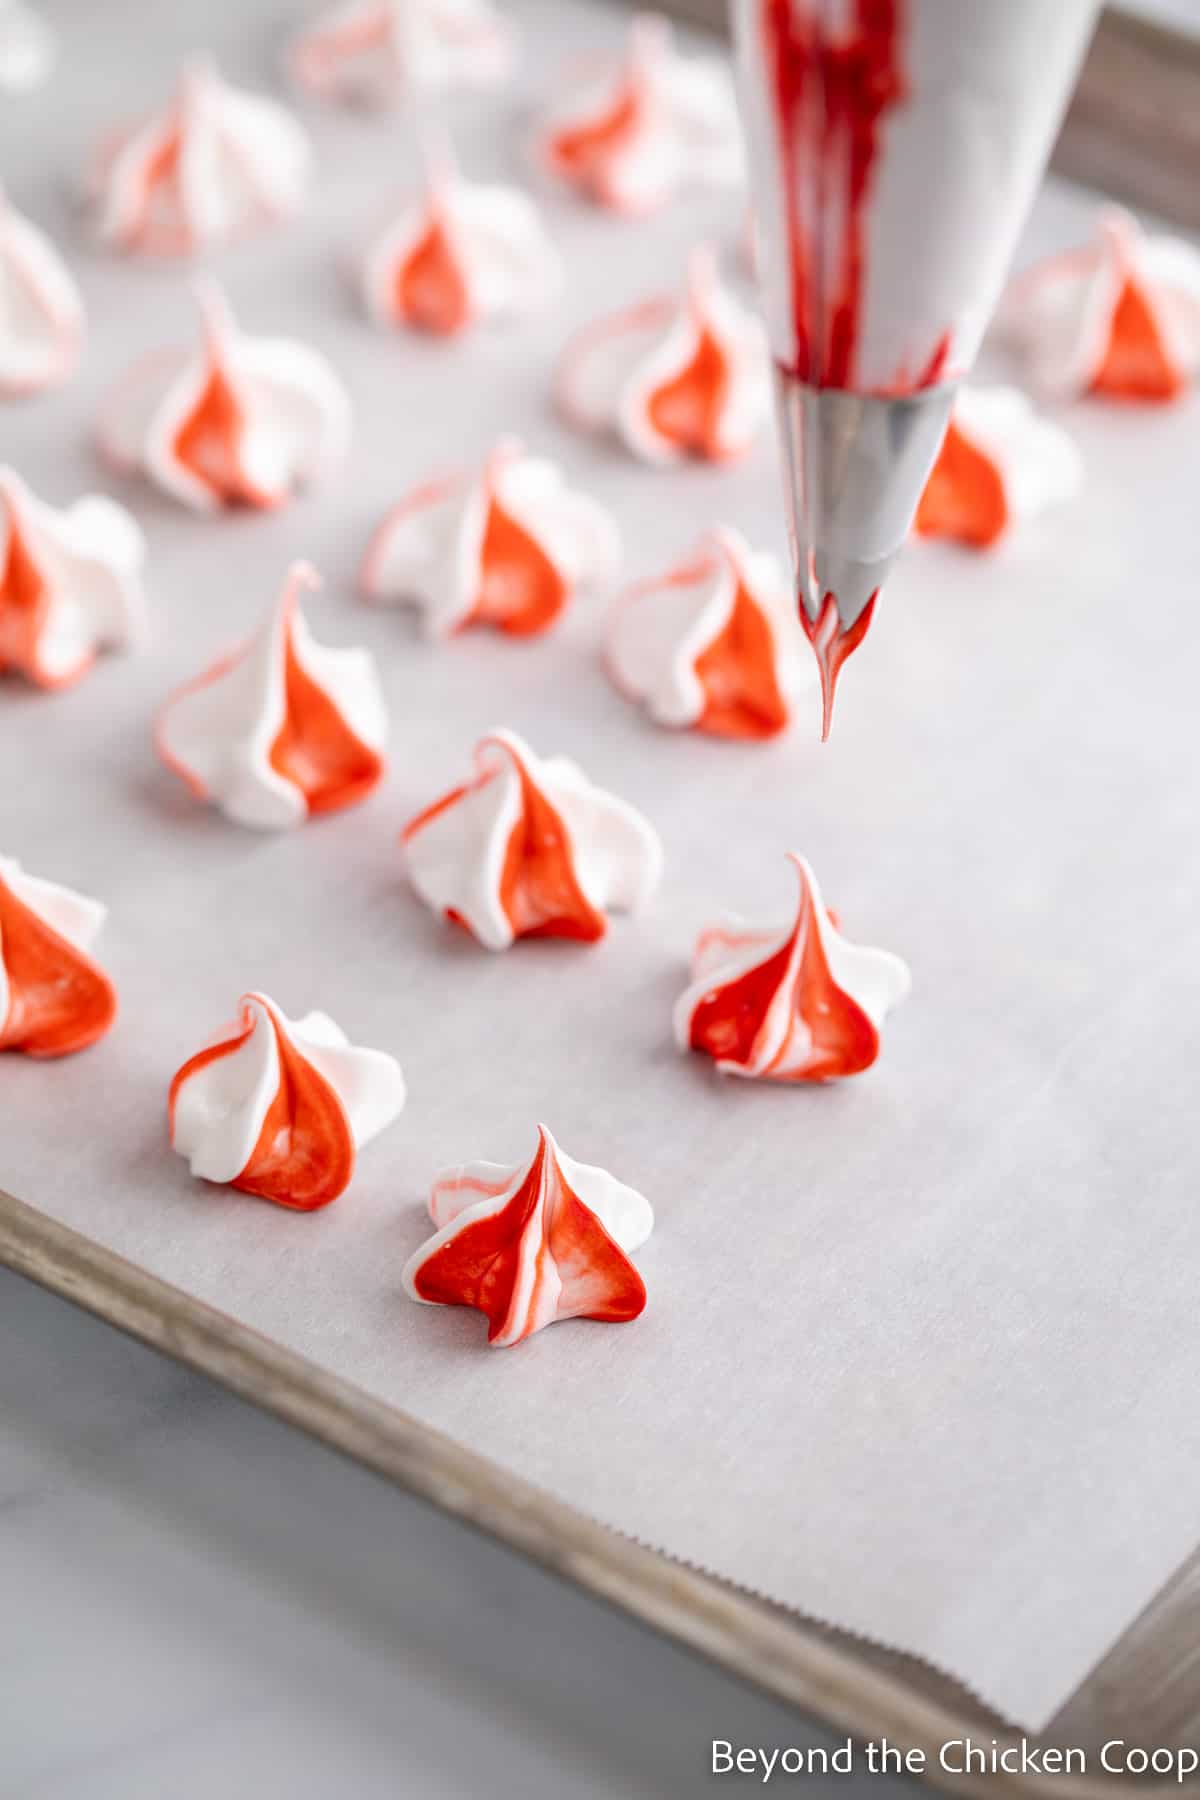 Red and white meringues on a baking sheet.